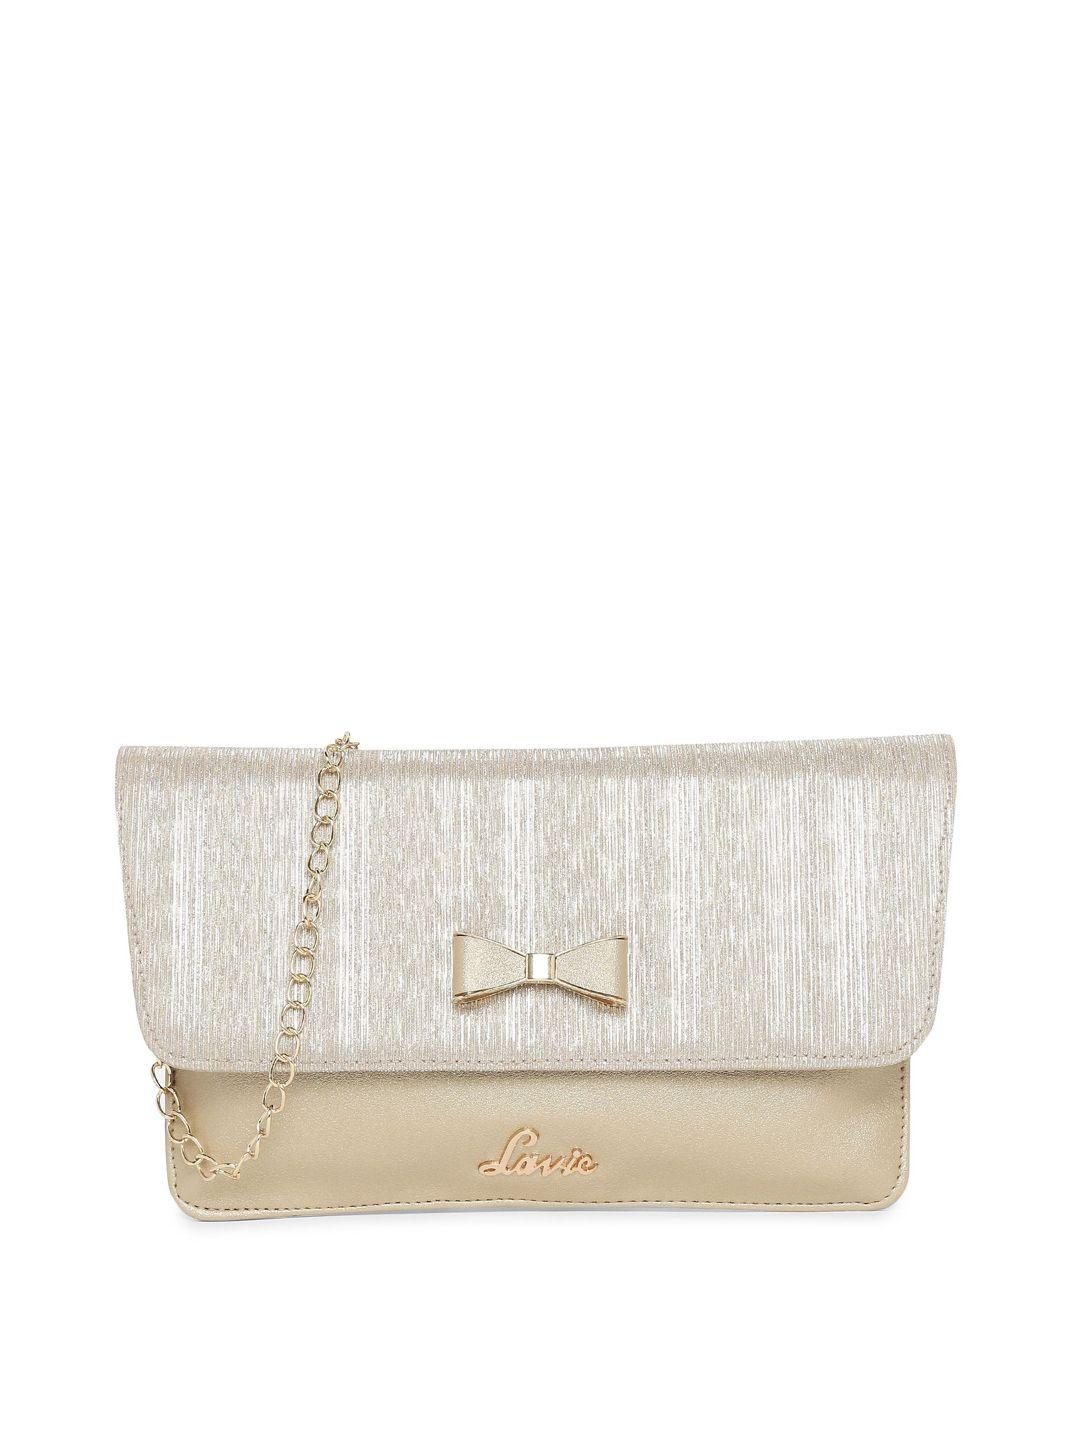 lavie women gold-toned abstract textured bow detail envelope